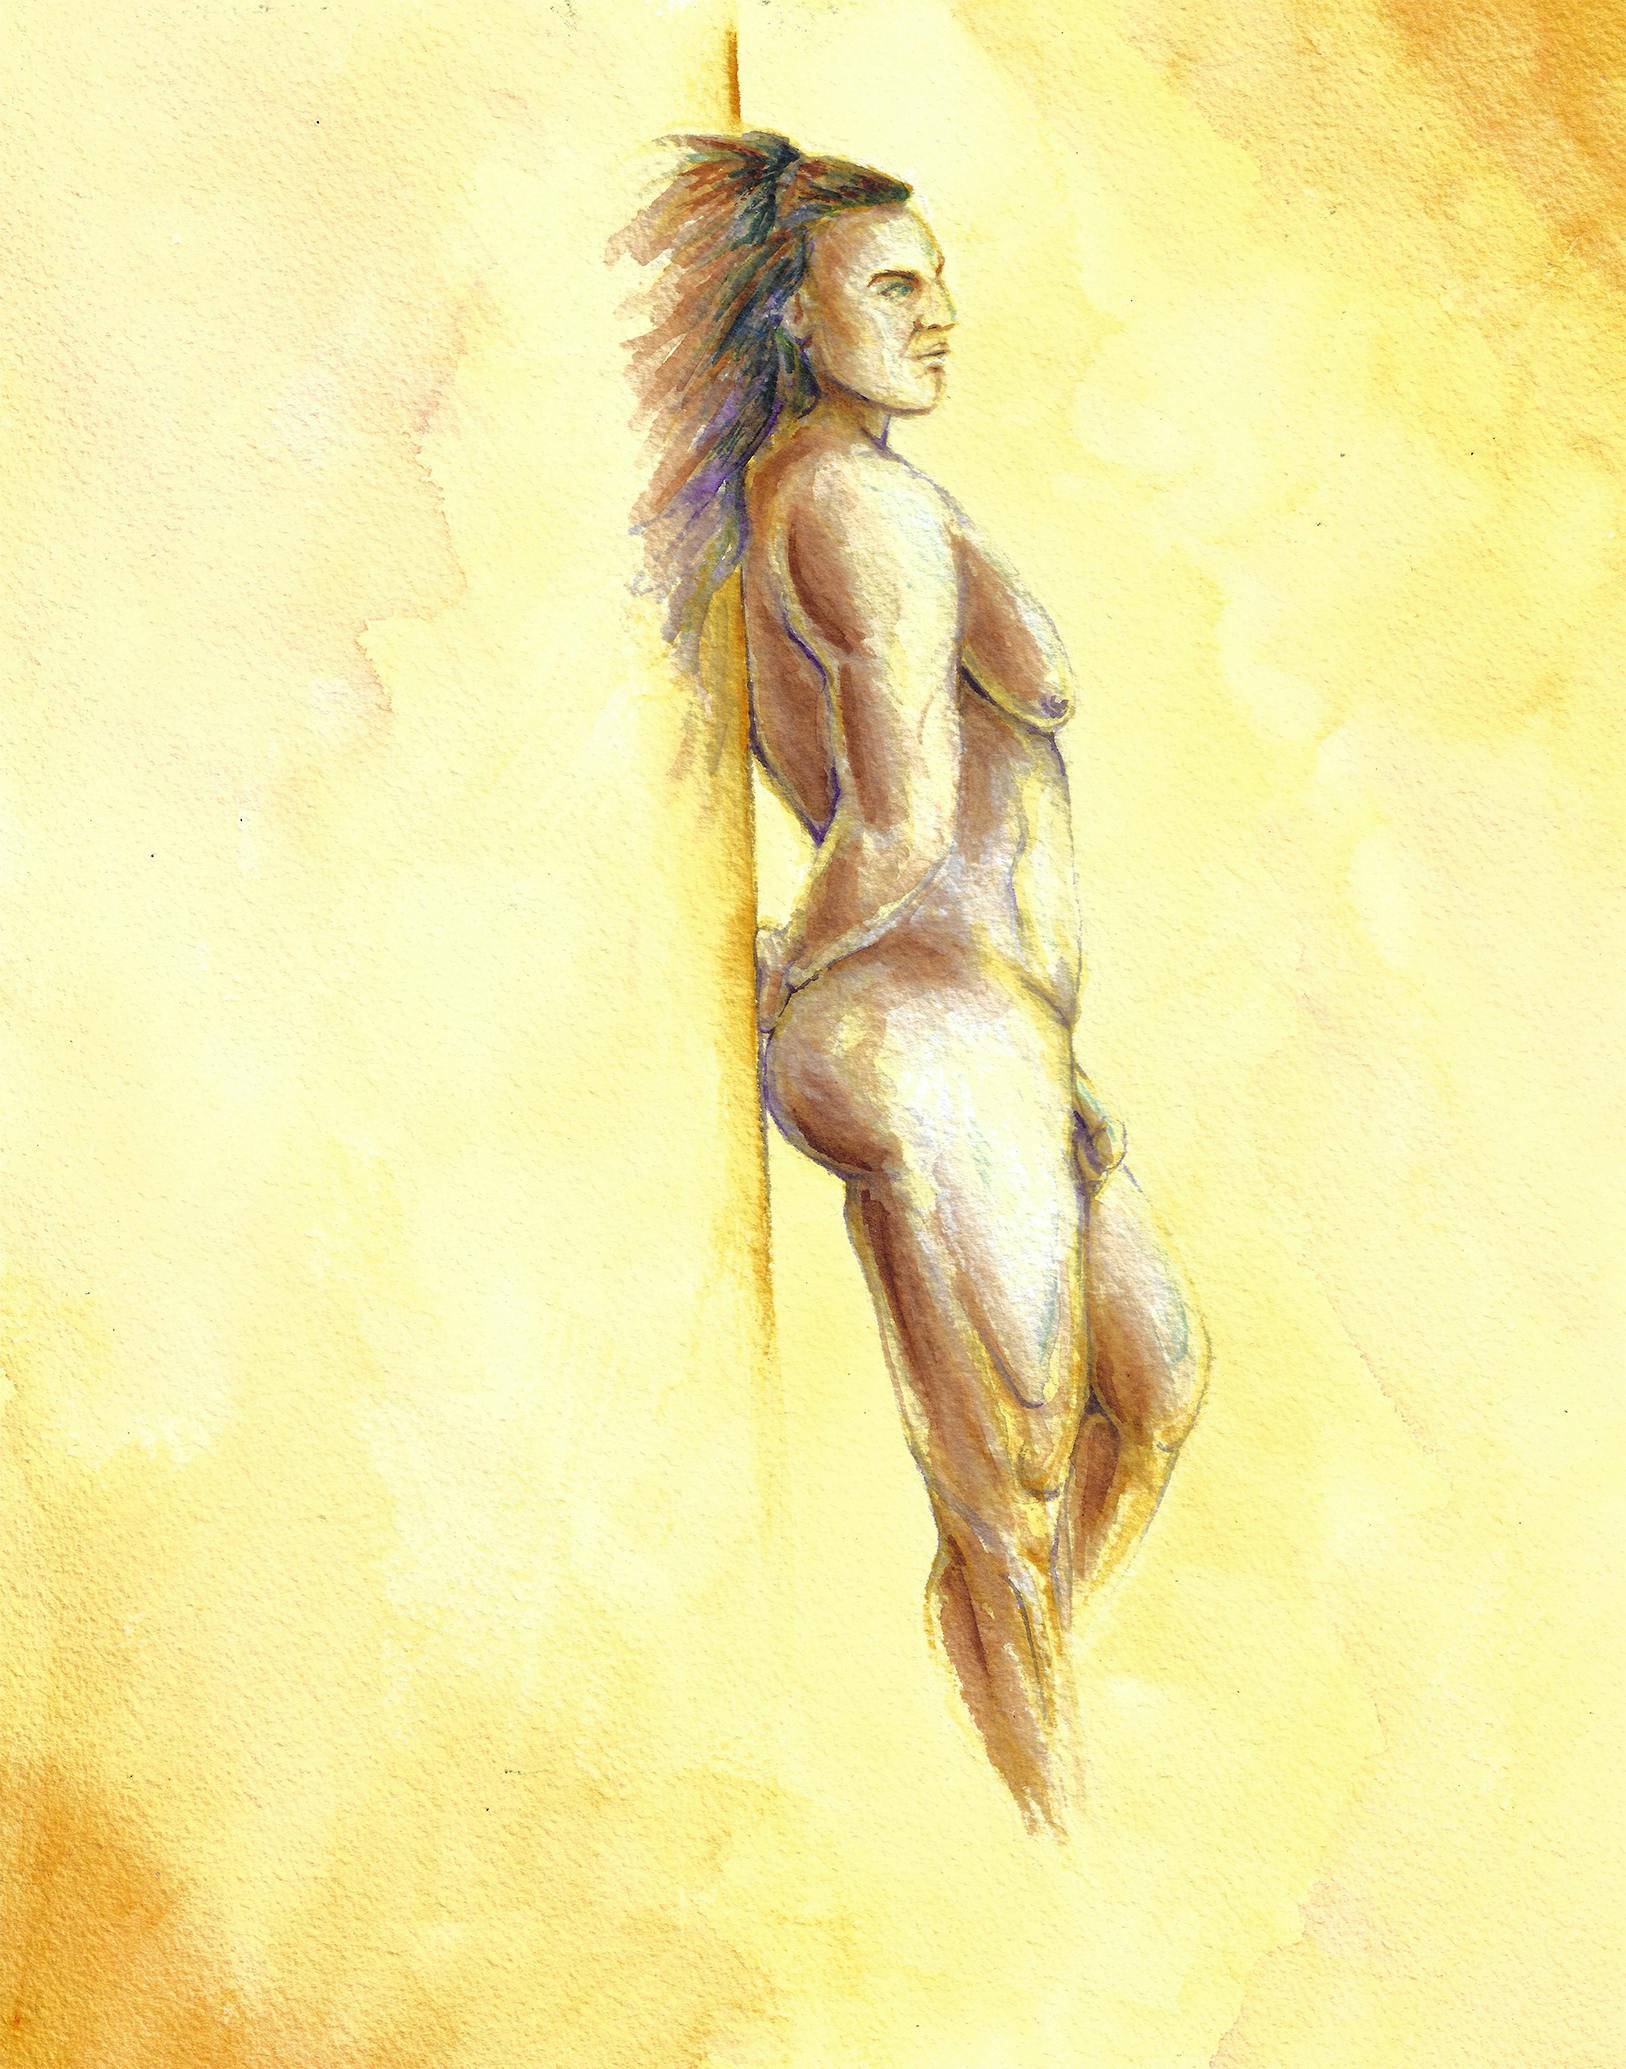 watercolor painting of nude male figure